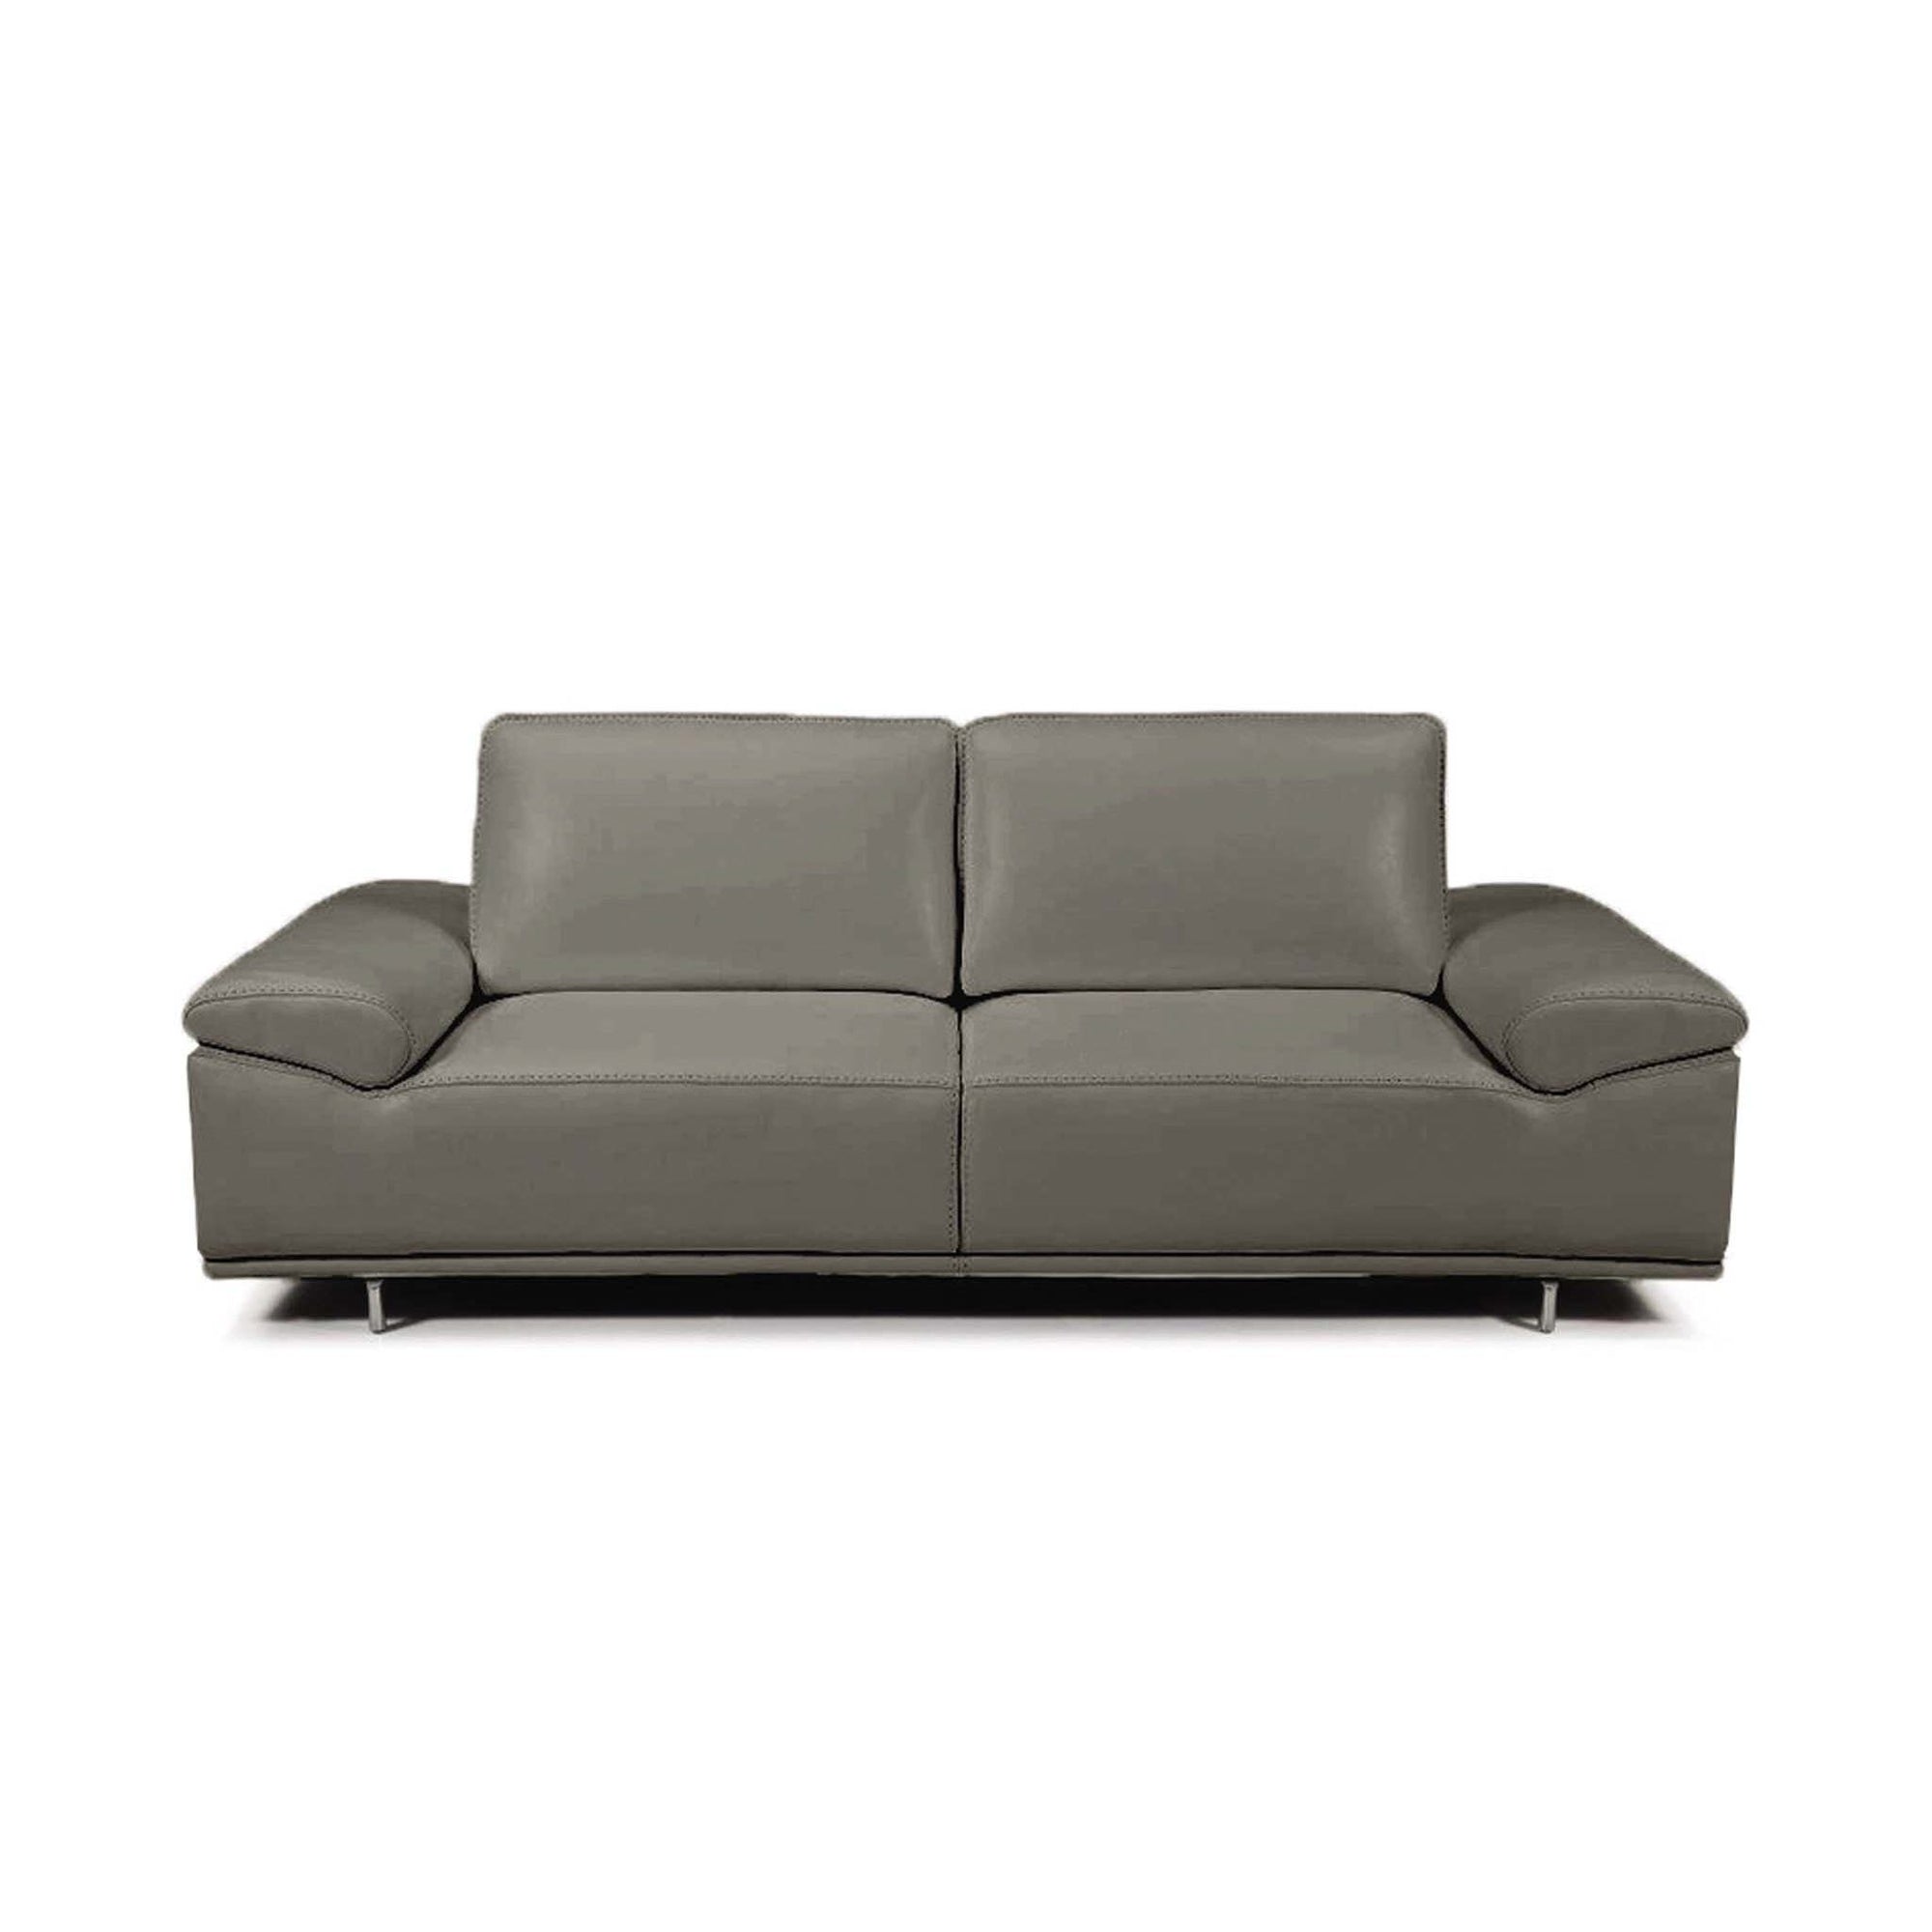 Bellini-Roxanne Loveseat #35607 With Adjustable Back & Arm Cushions-Loveseats-MODTEMPO